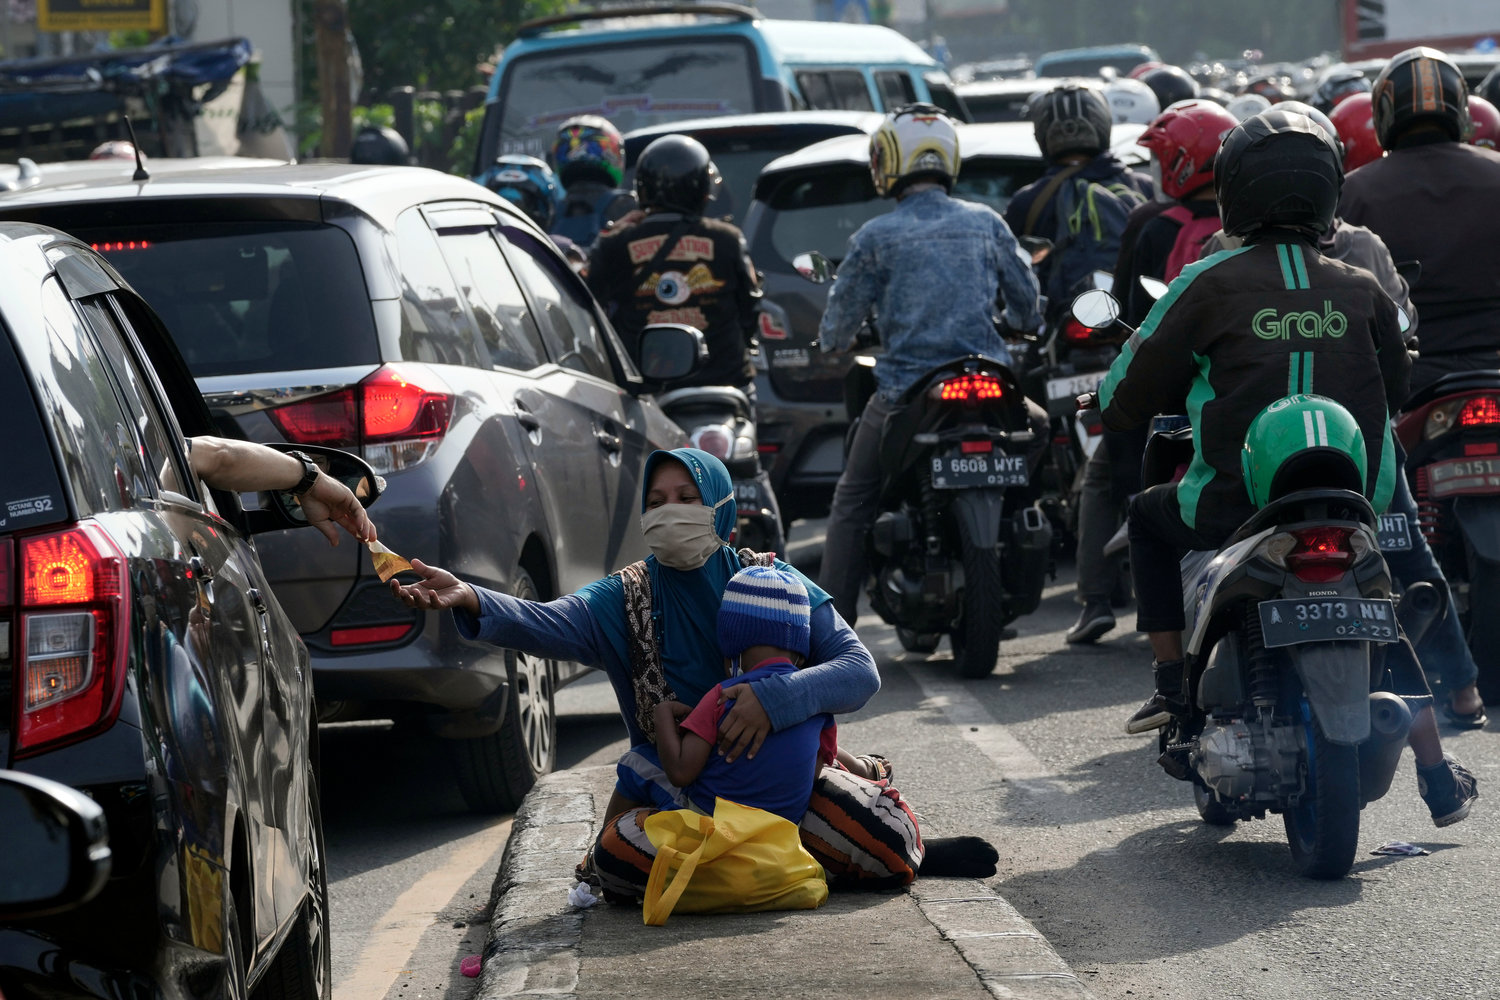 A motorist gives money to beggars while stuck in the morning rush hour traffic in Jakarta, Indonesia, Monday, Nov. 14, 2022. The 8 billionth baby on Earth is about to be born on a planet that is getting hotter. But experts in climate science and population both say the two issues aren't quite as connected as they seem. (AP Photo/Tatan Syuflana)